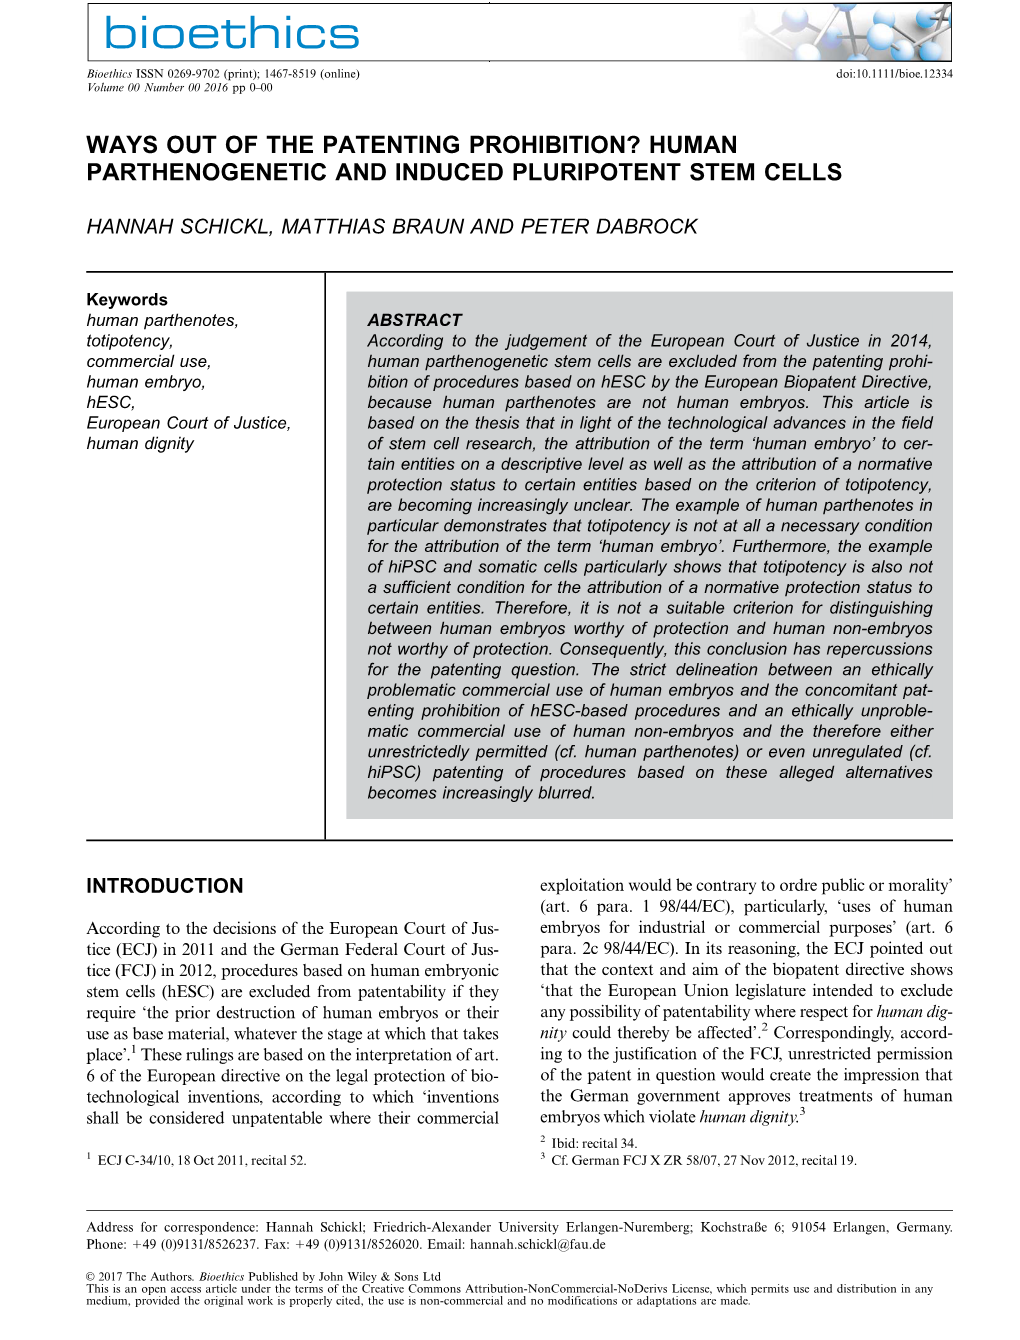 Human Parthenogenetic and Induced Pluripotent Stem Cells